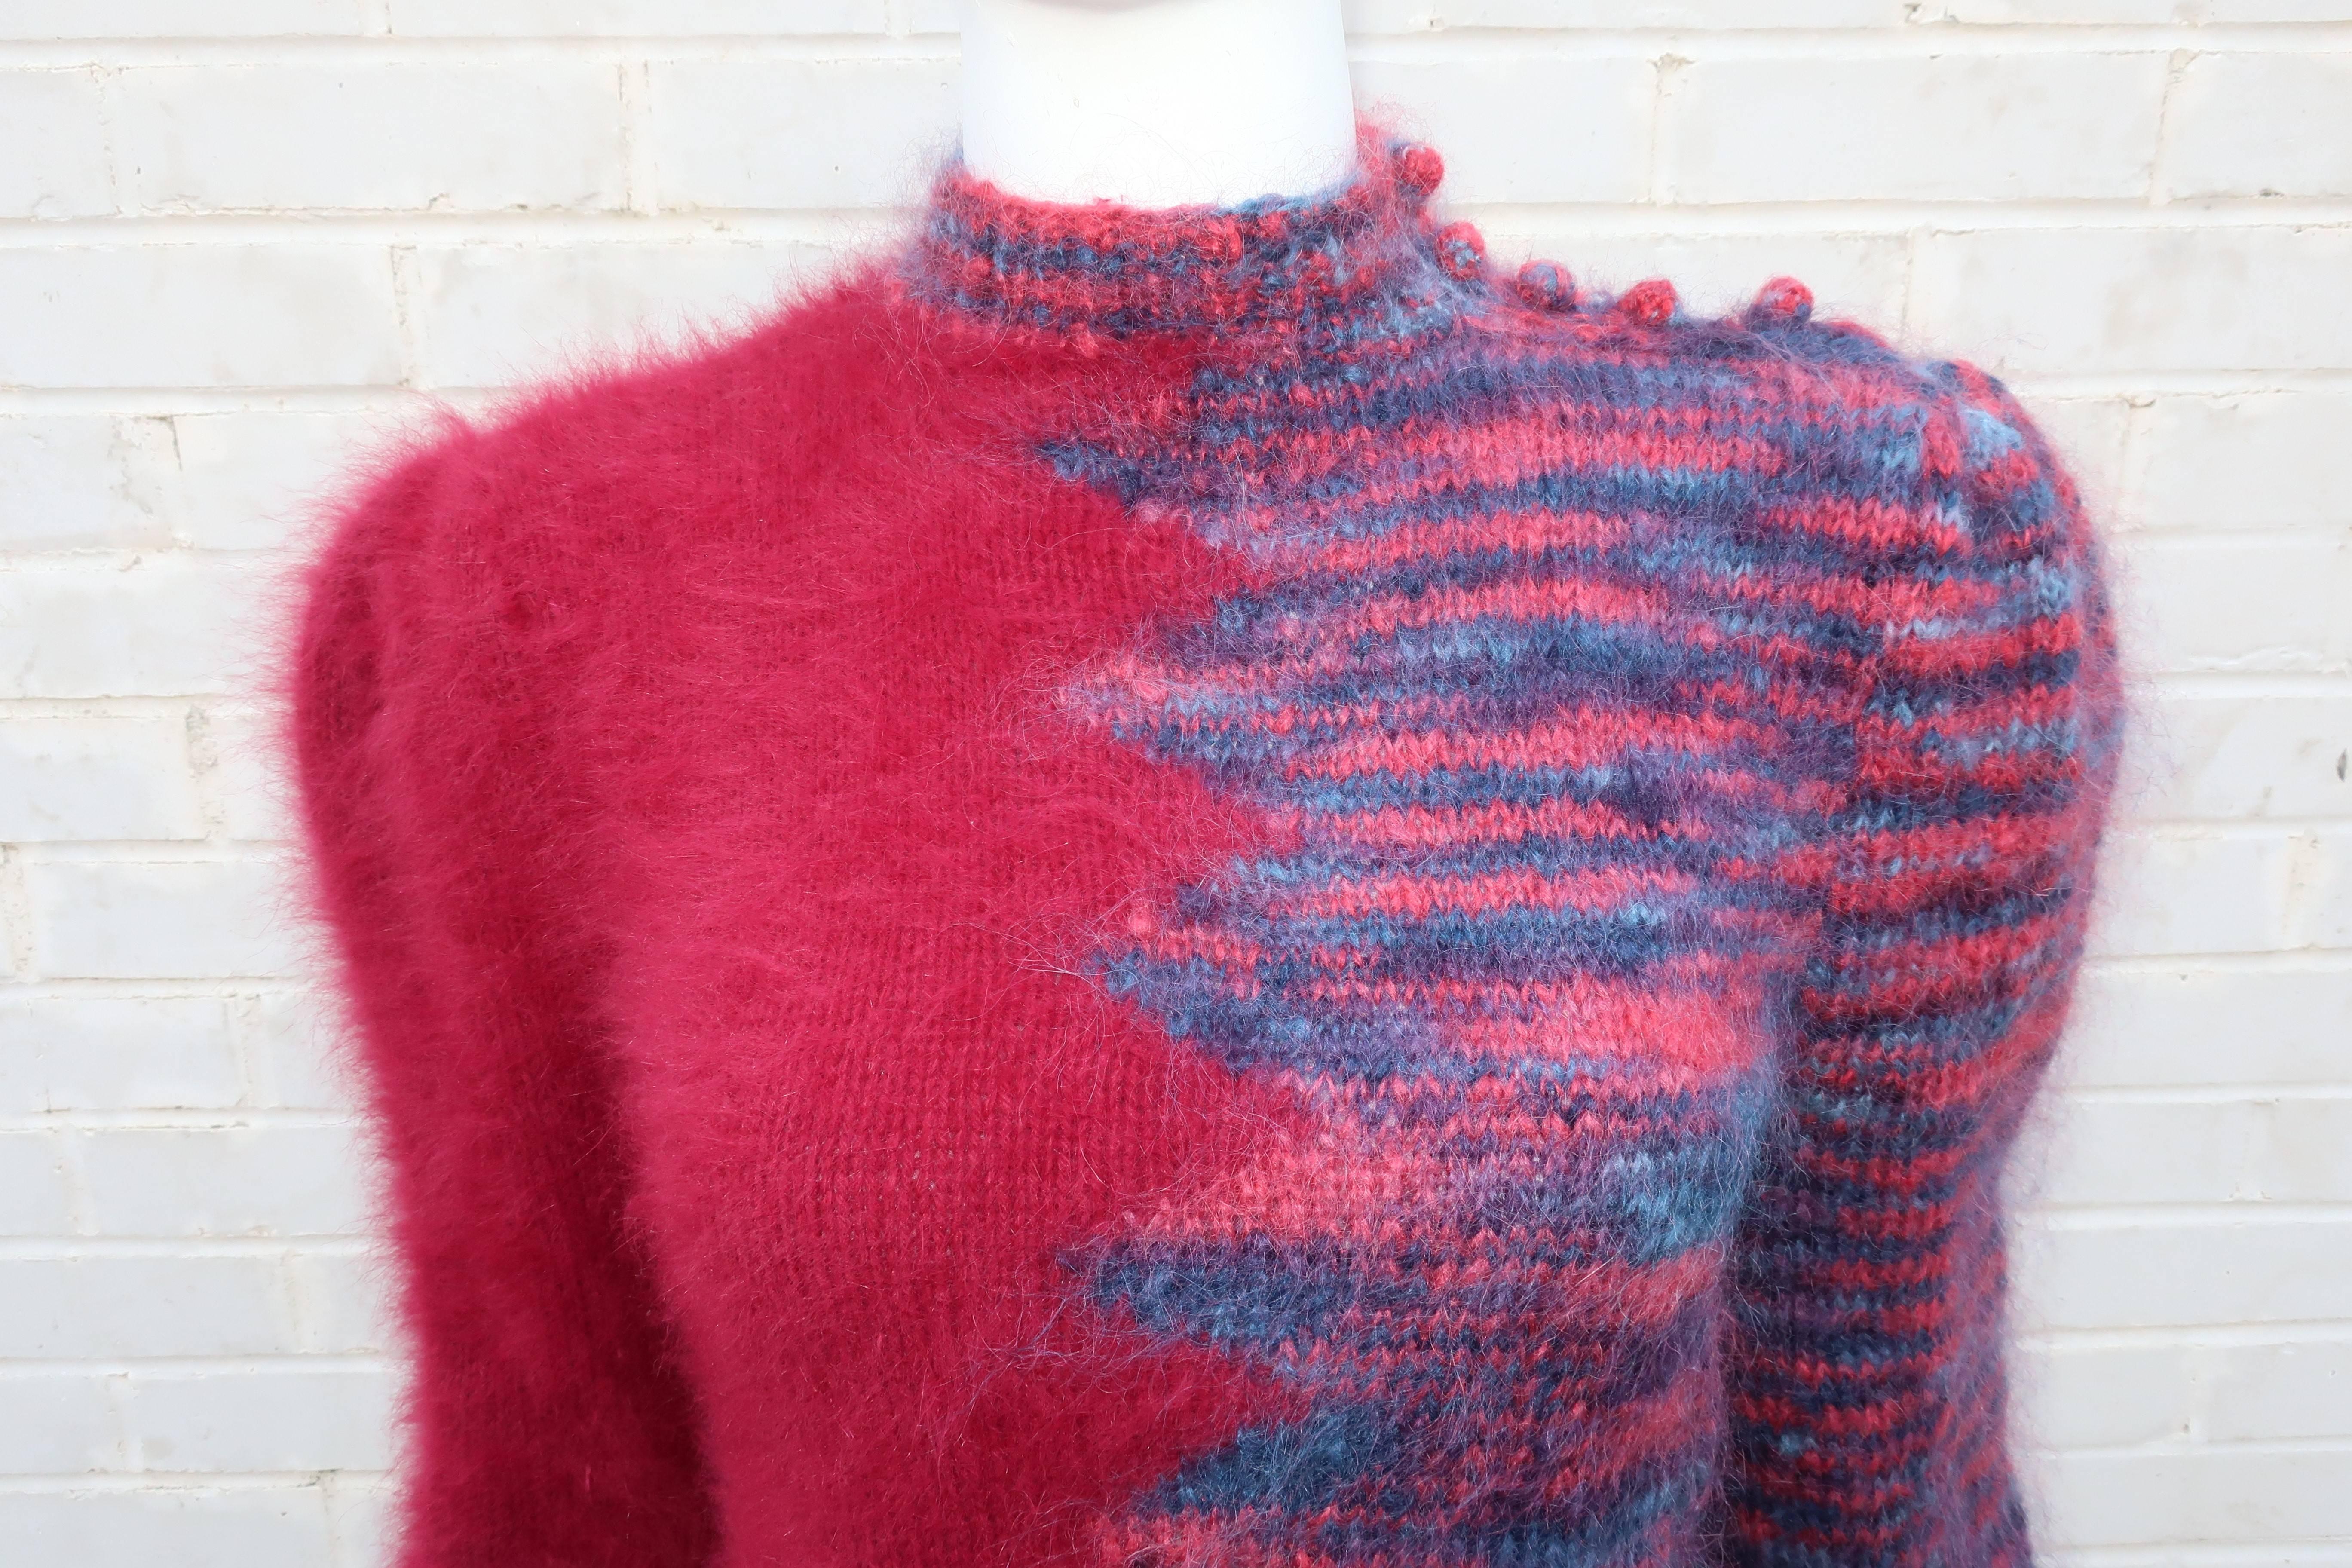 Get prepared to be touched! This 1970’s hand knit angora sweater is irresistible.  The mock turtleneck pullover has buttons on one shoulder and a ribbed waistband with coordinating cuffs.  One side is a lovely cranberry red with hints of dark